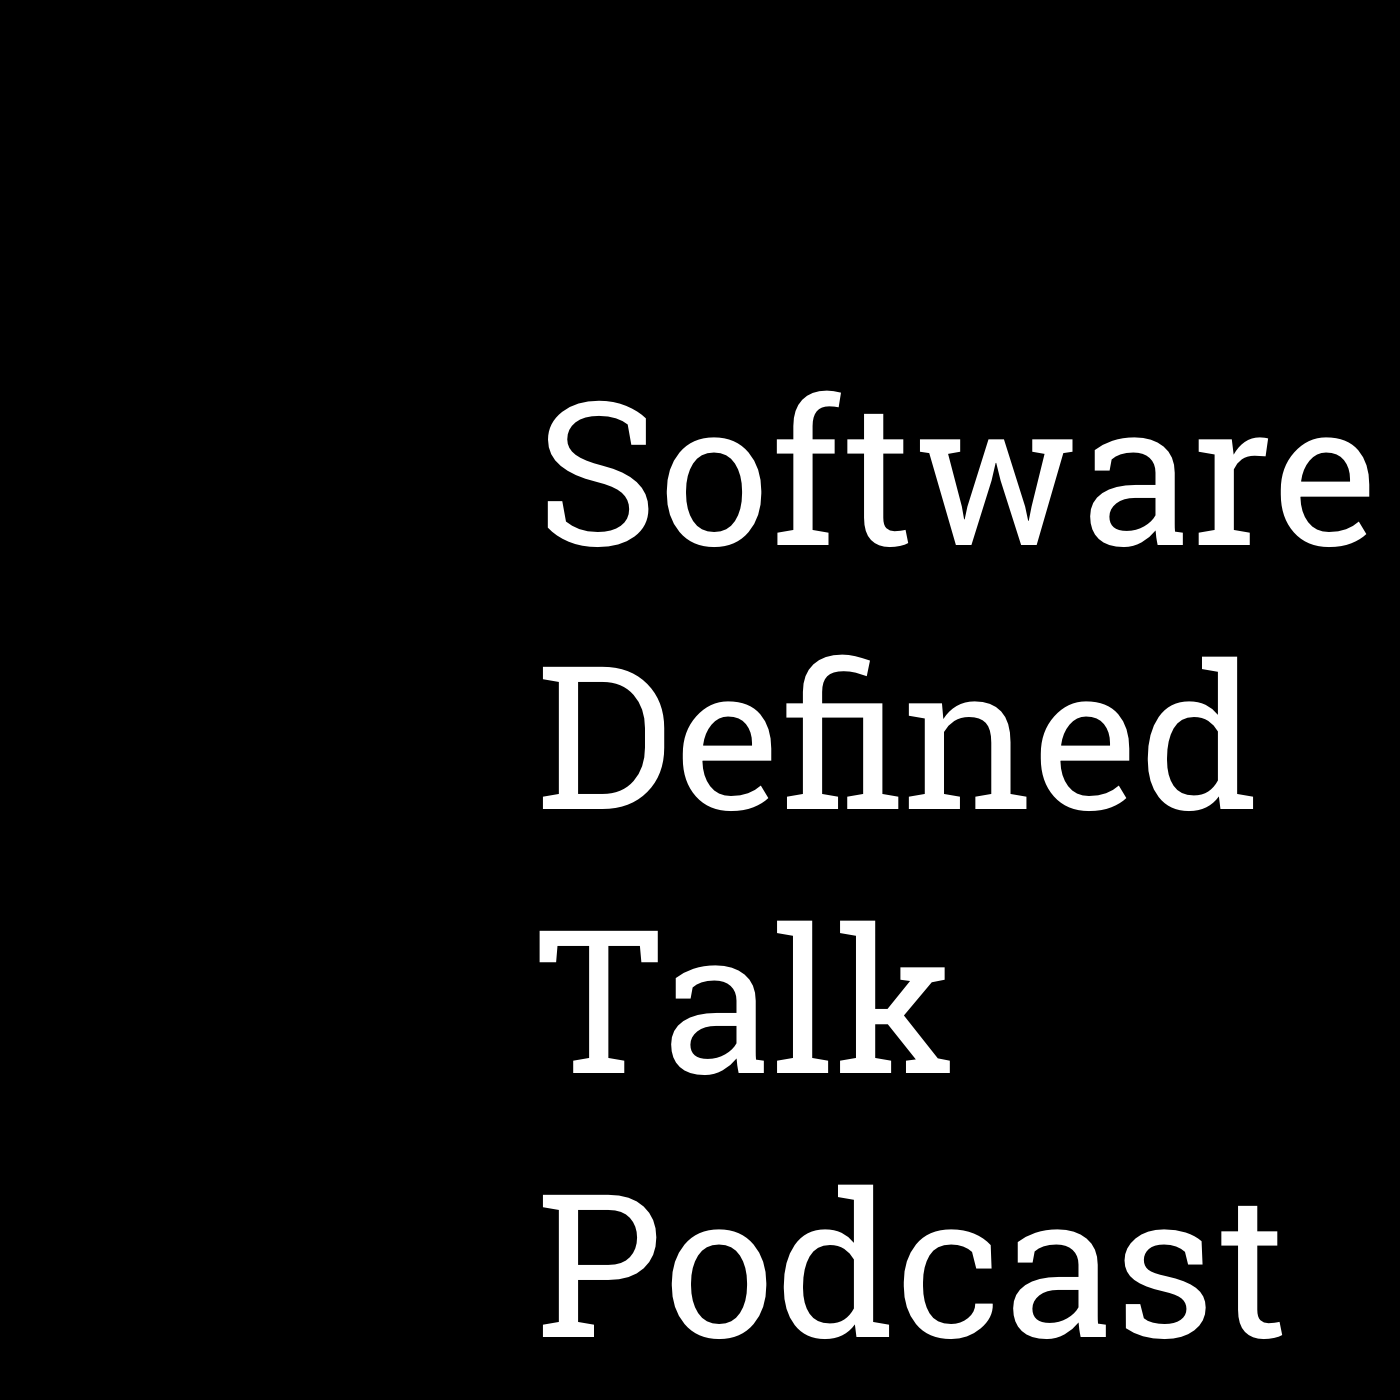 Software Defined Talk Podcast